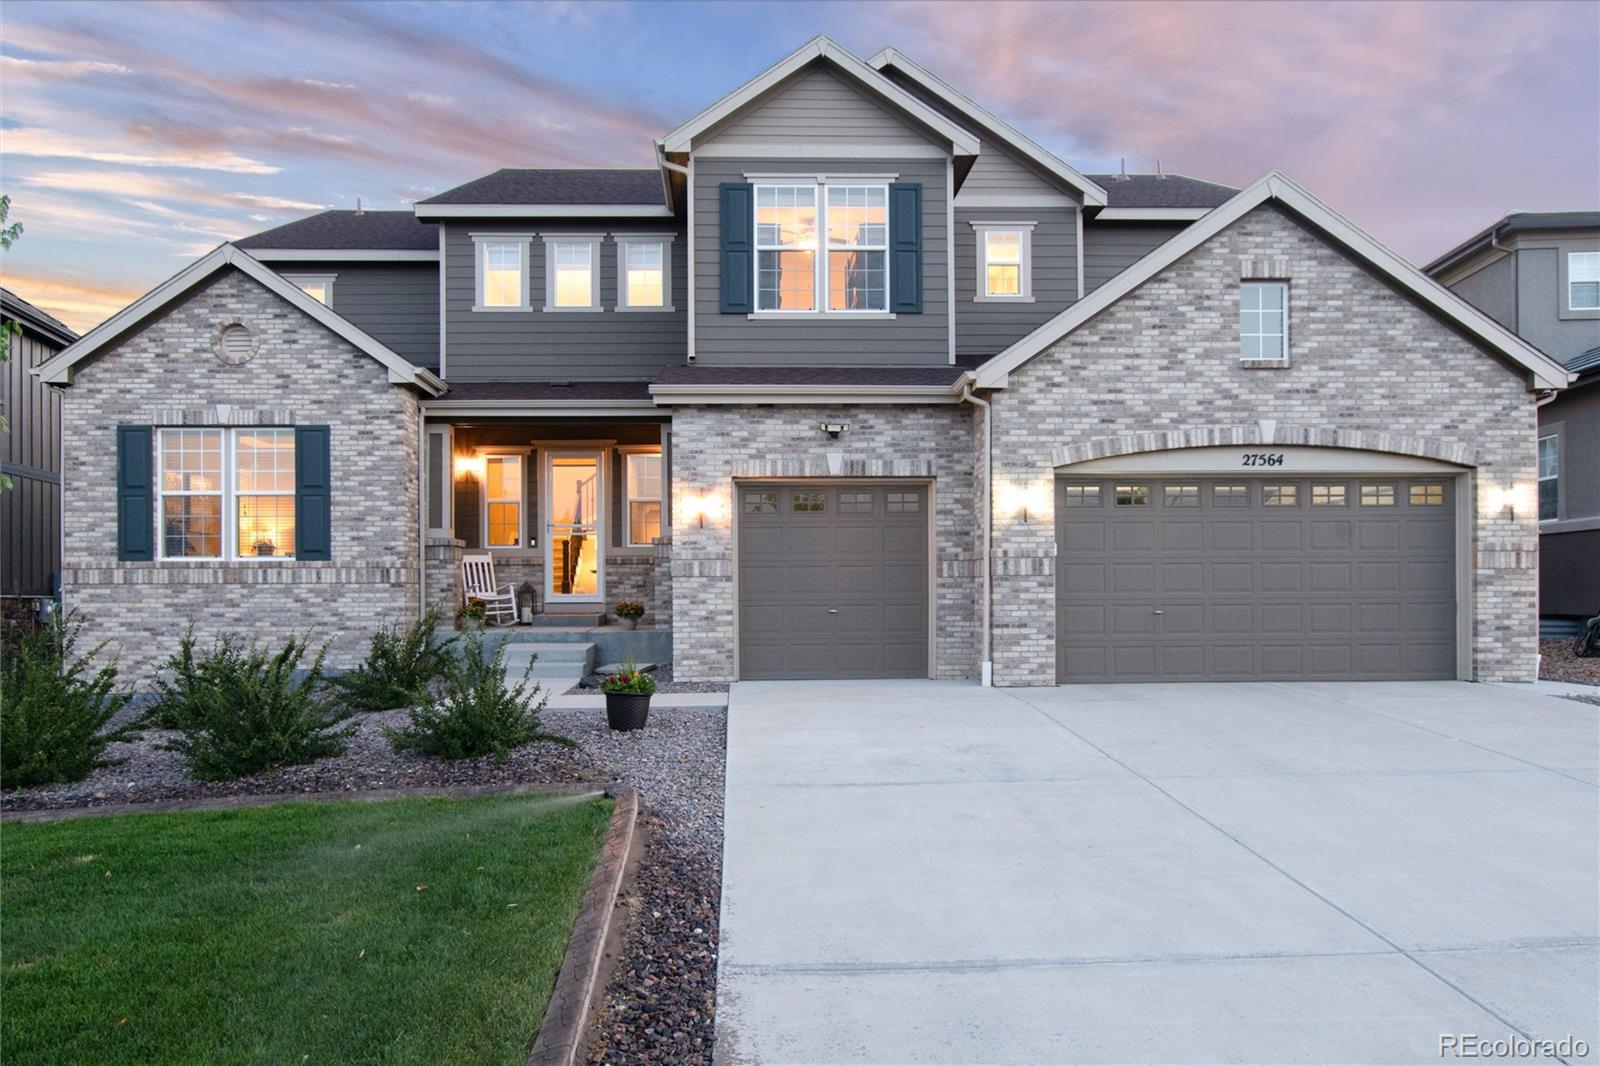 27564  Canyon Place, aurora MLS: 5010055 Beds: 6 Baths: 5 Price: $1,170,000